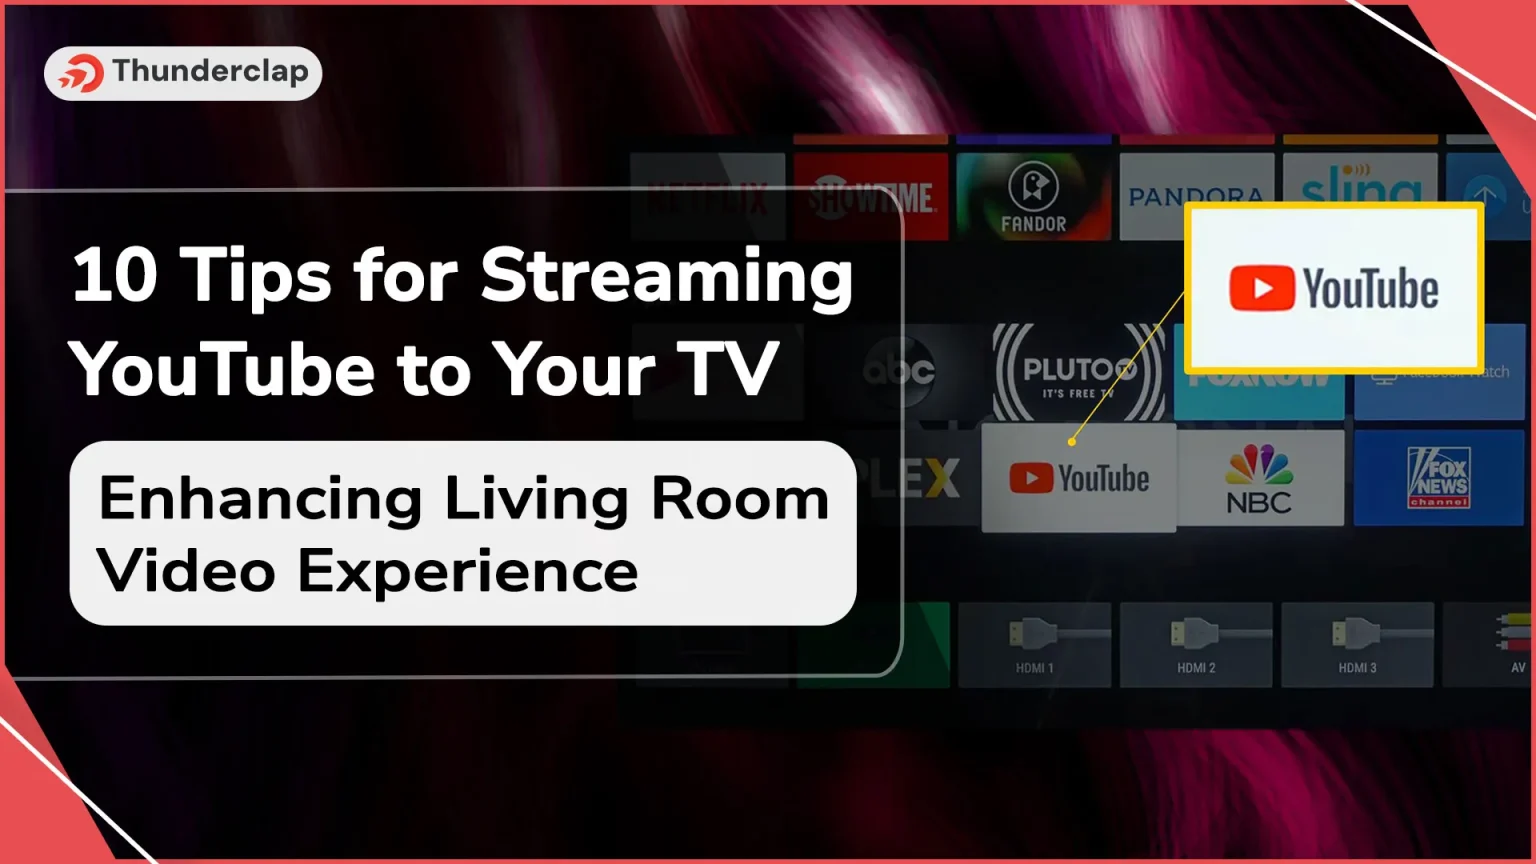 10 Tips for Streaming YouTube to Your TV